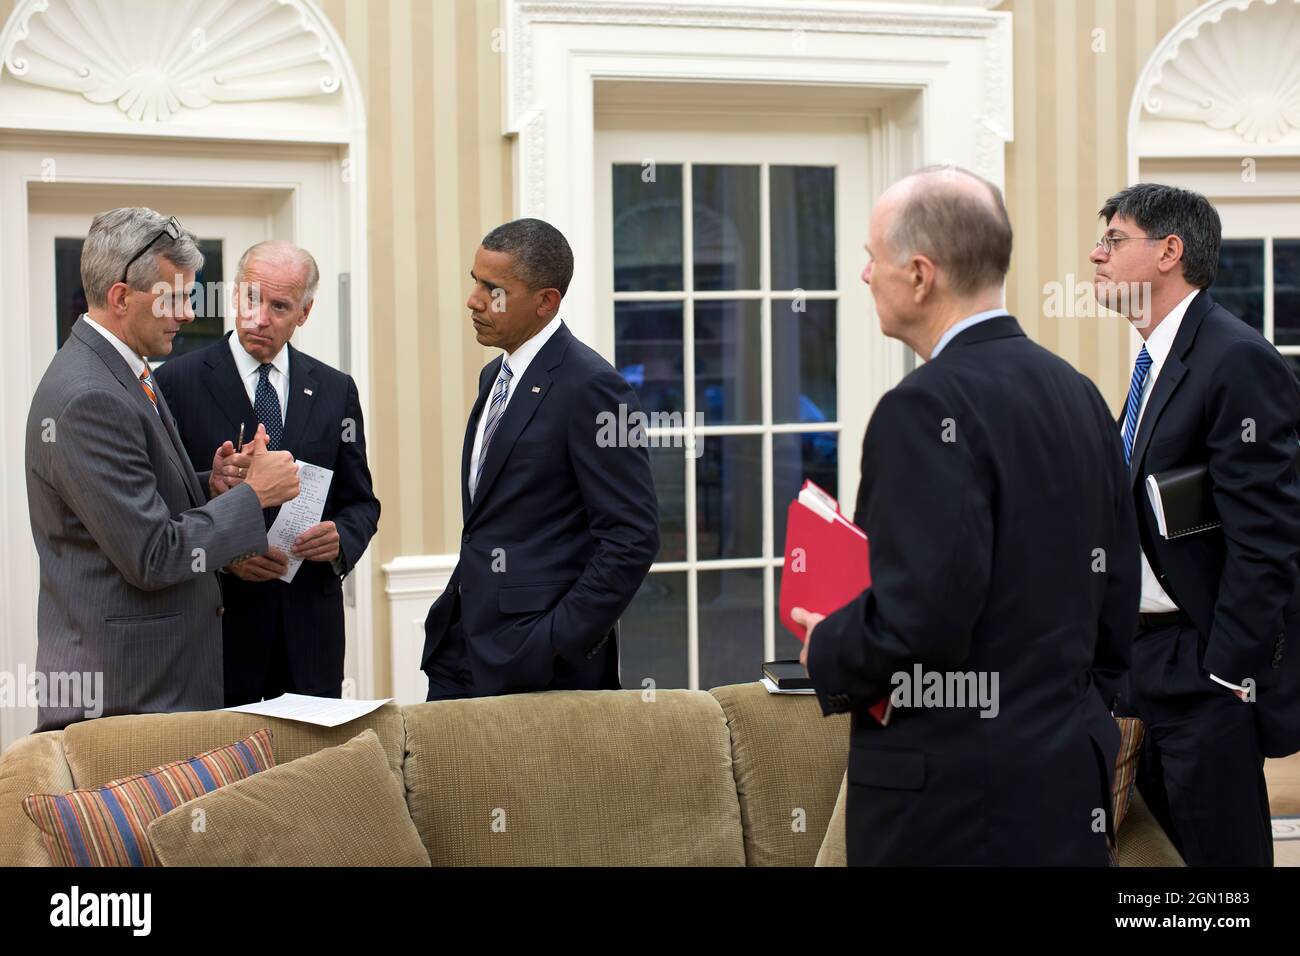 President Barack Obama and Vice President Joe Biden talk with senior advisors in the Oval Office, Sept. 11, 2012. Pictured, from left, are: Deputy National Security Advisor Denis McDonough; National Security Advisor Tom Donilon; and Chief of Staff Jack Lew. (Official White House Photo by Pete Souza) This official White House photograph is being made available only for publication by news organizations and/or for personal use printing by the subject(s) of the photograph. The photograph may not be manipulated in any way and may not be used in commercial or political materials, advertisements, em Stock Photo